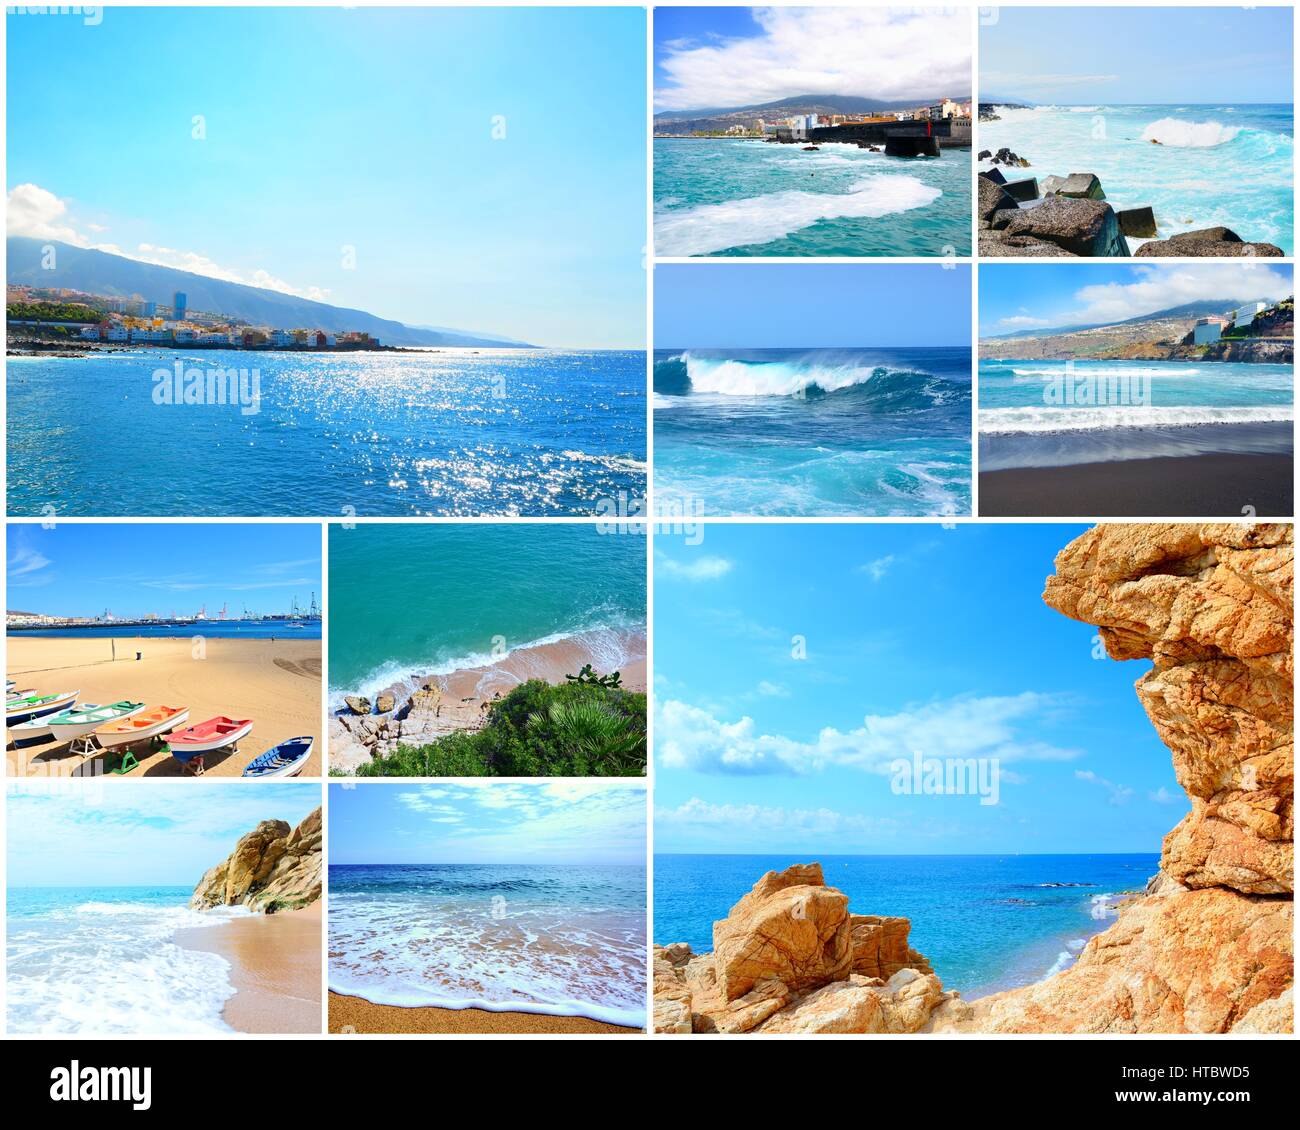 Collage of travel pictures from the holidays on the beach and sea. Stock Photo